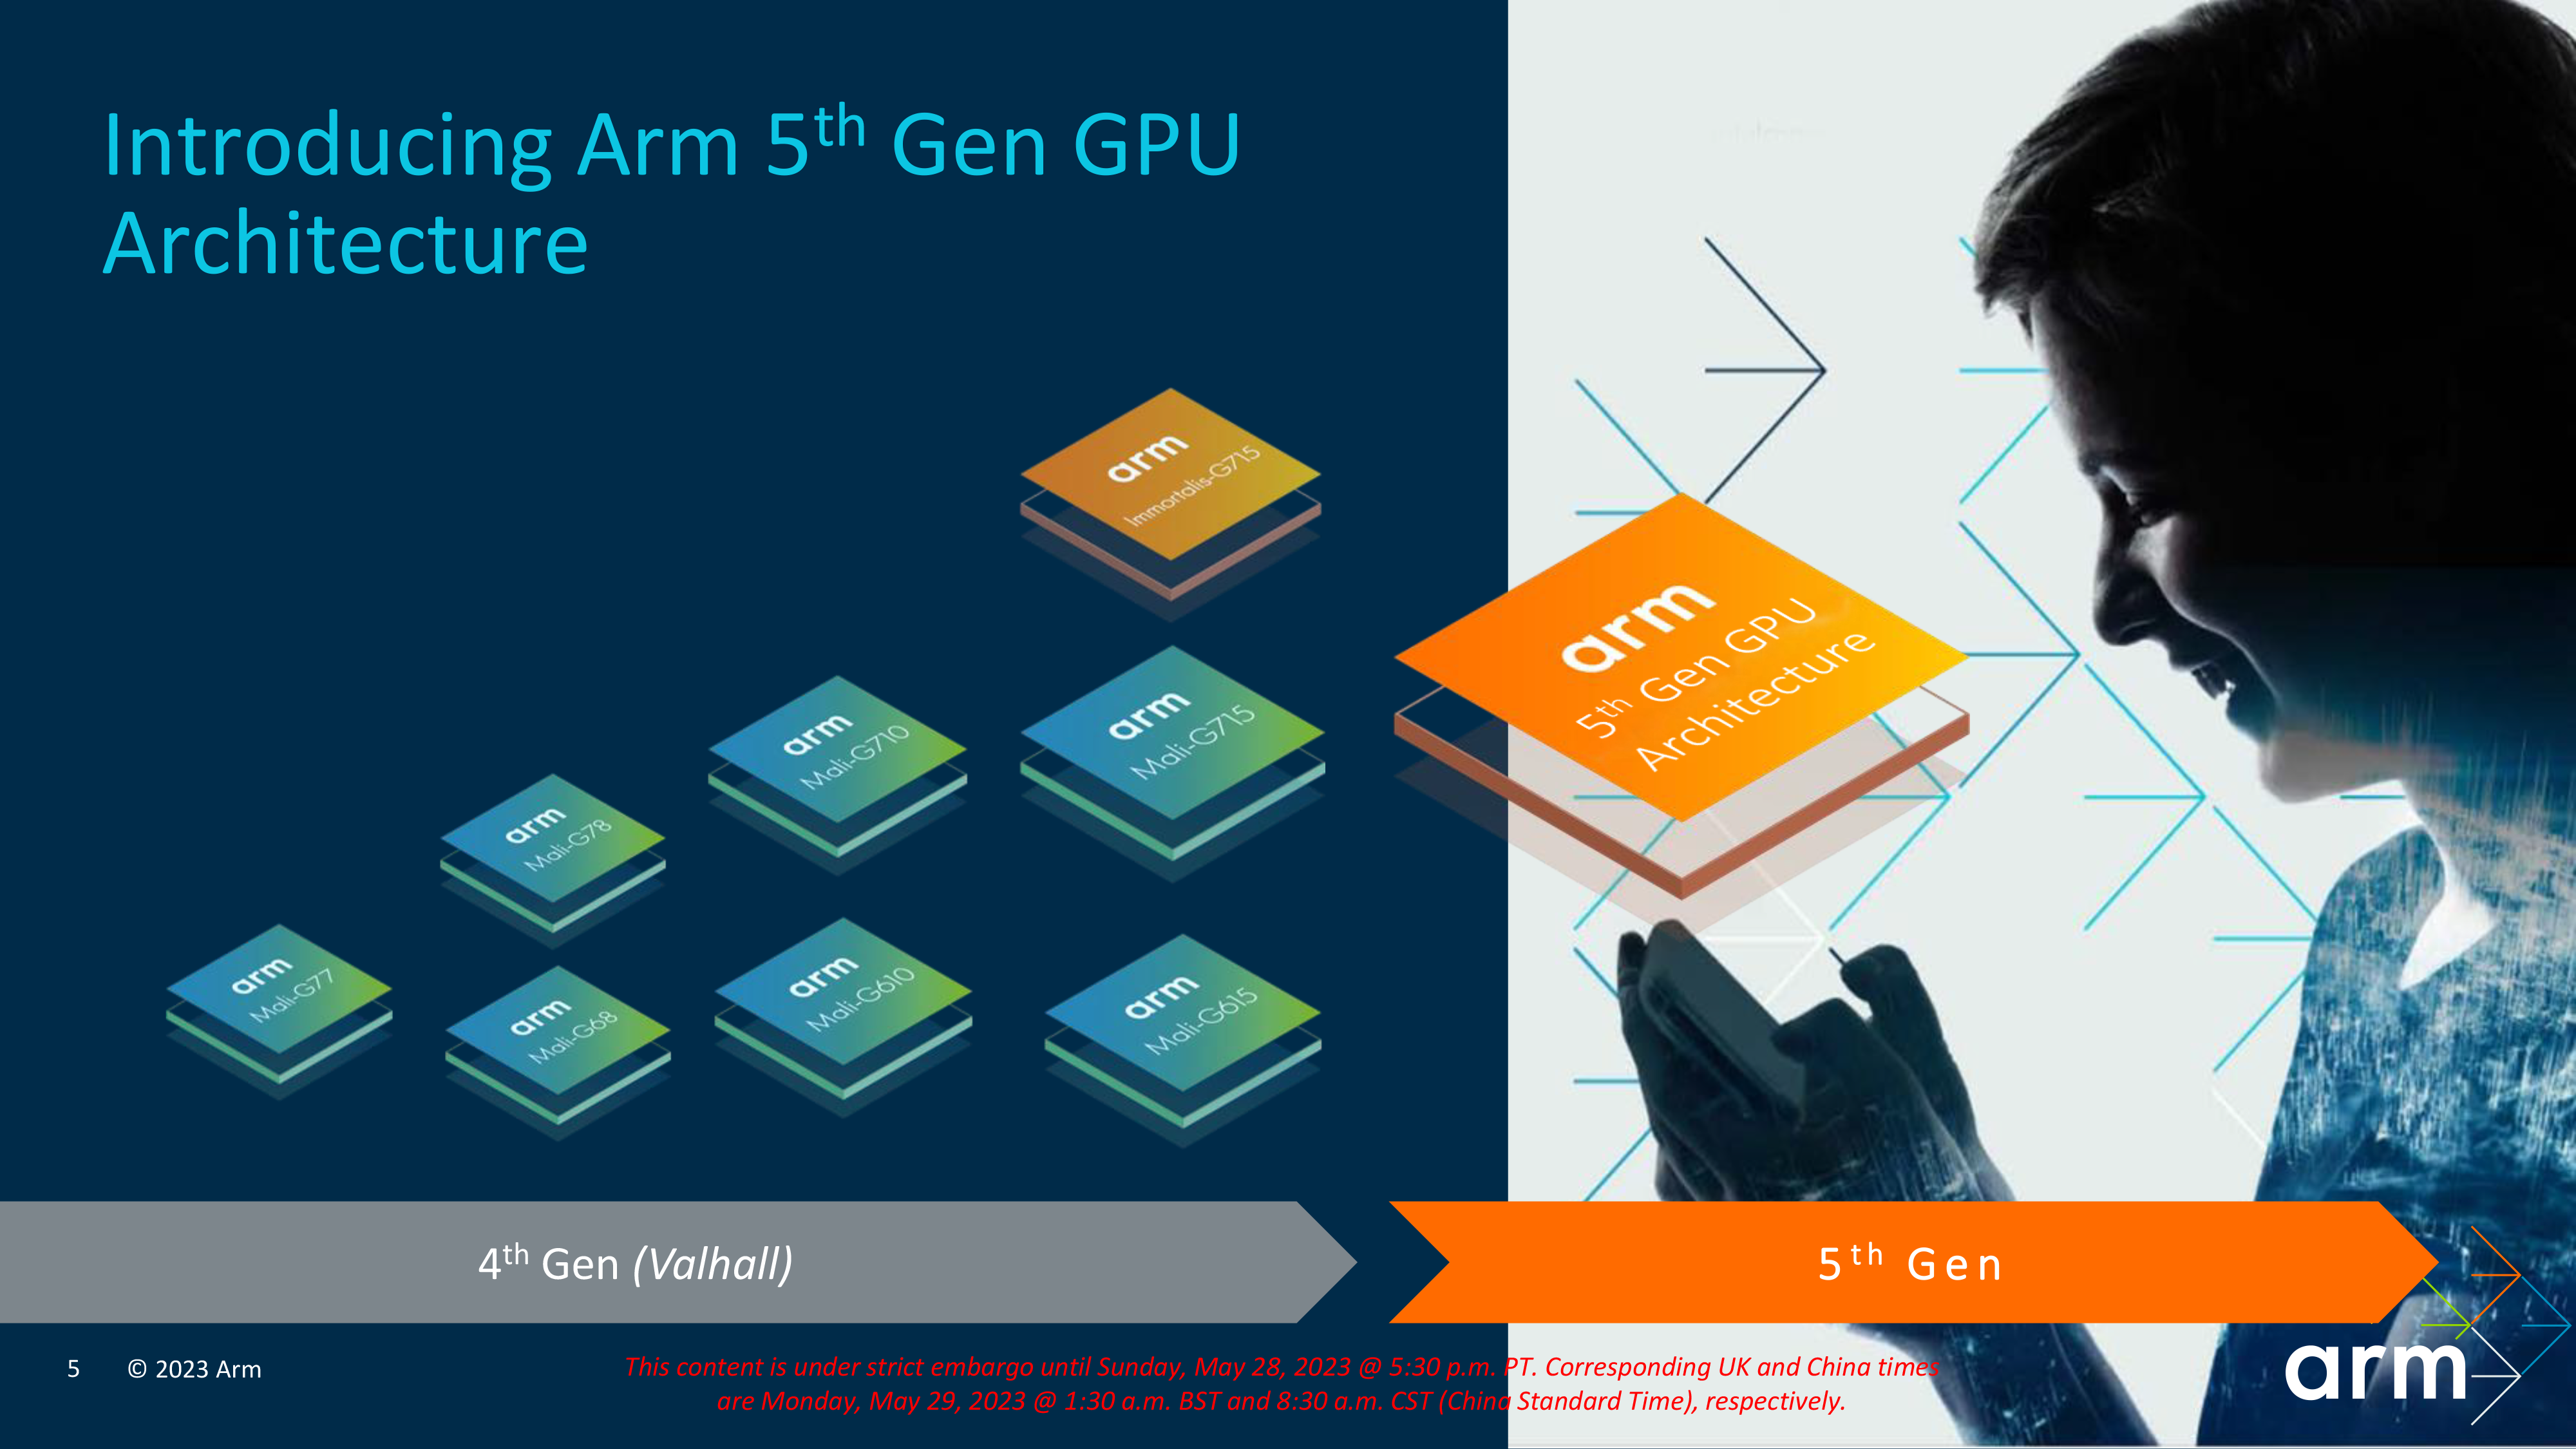 Arm’s new Immortalis G720 should yield big gains in performance and efficiency